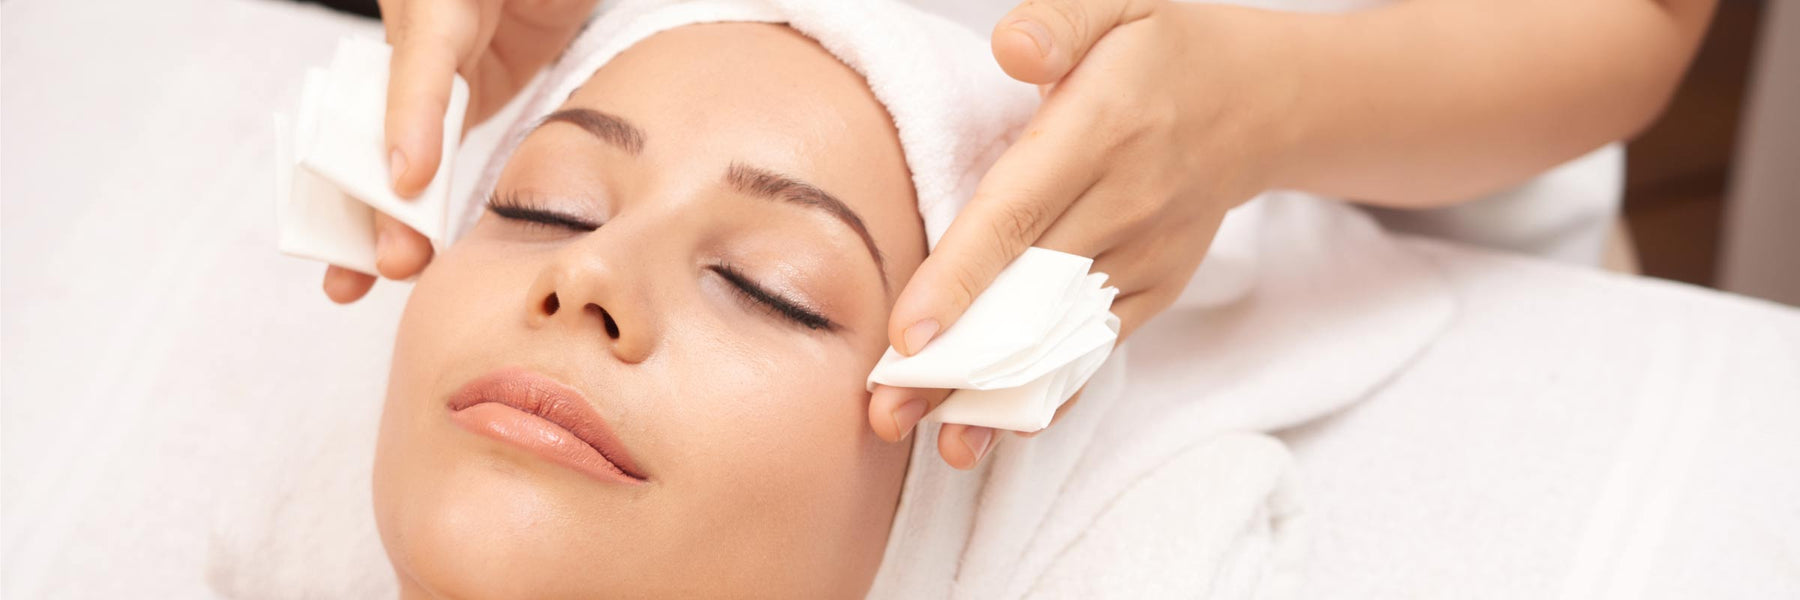 Chemical Peels: What They Do, Are They Safe